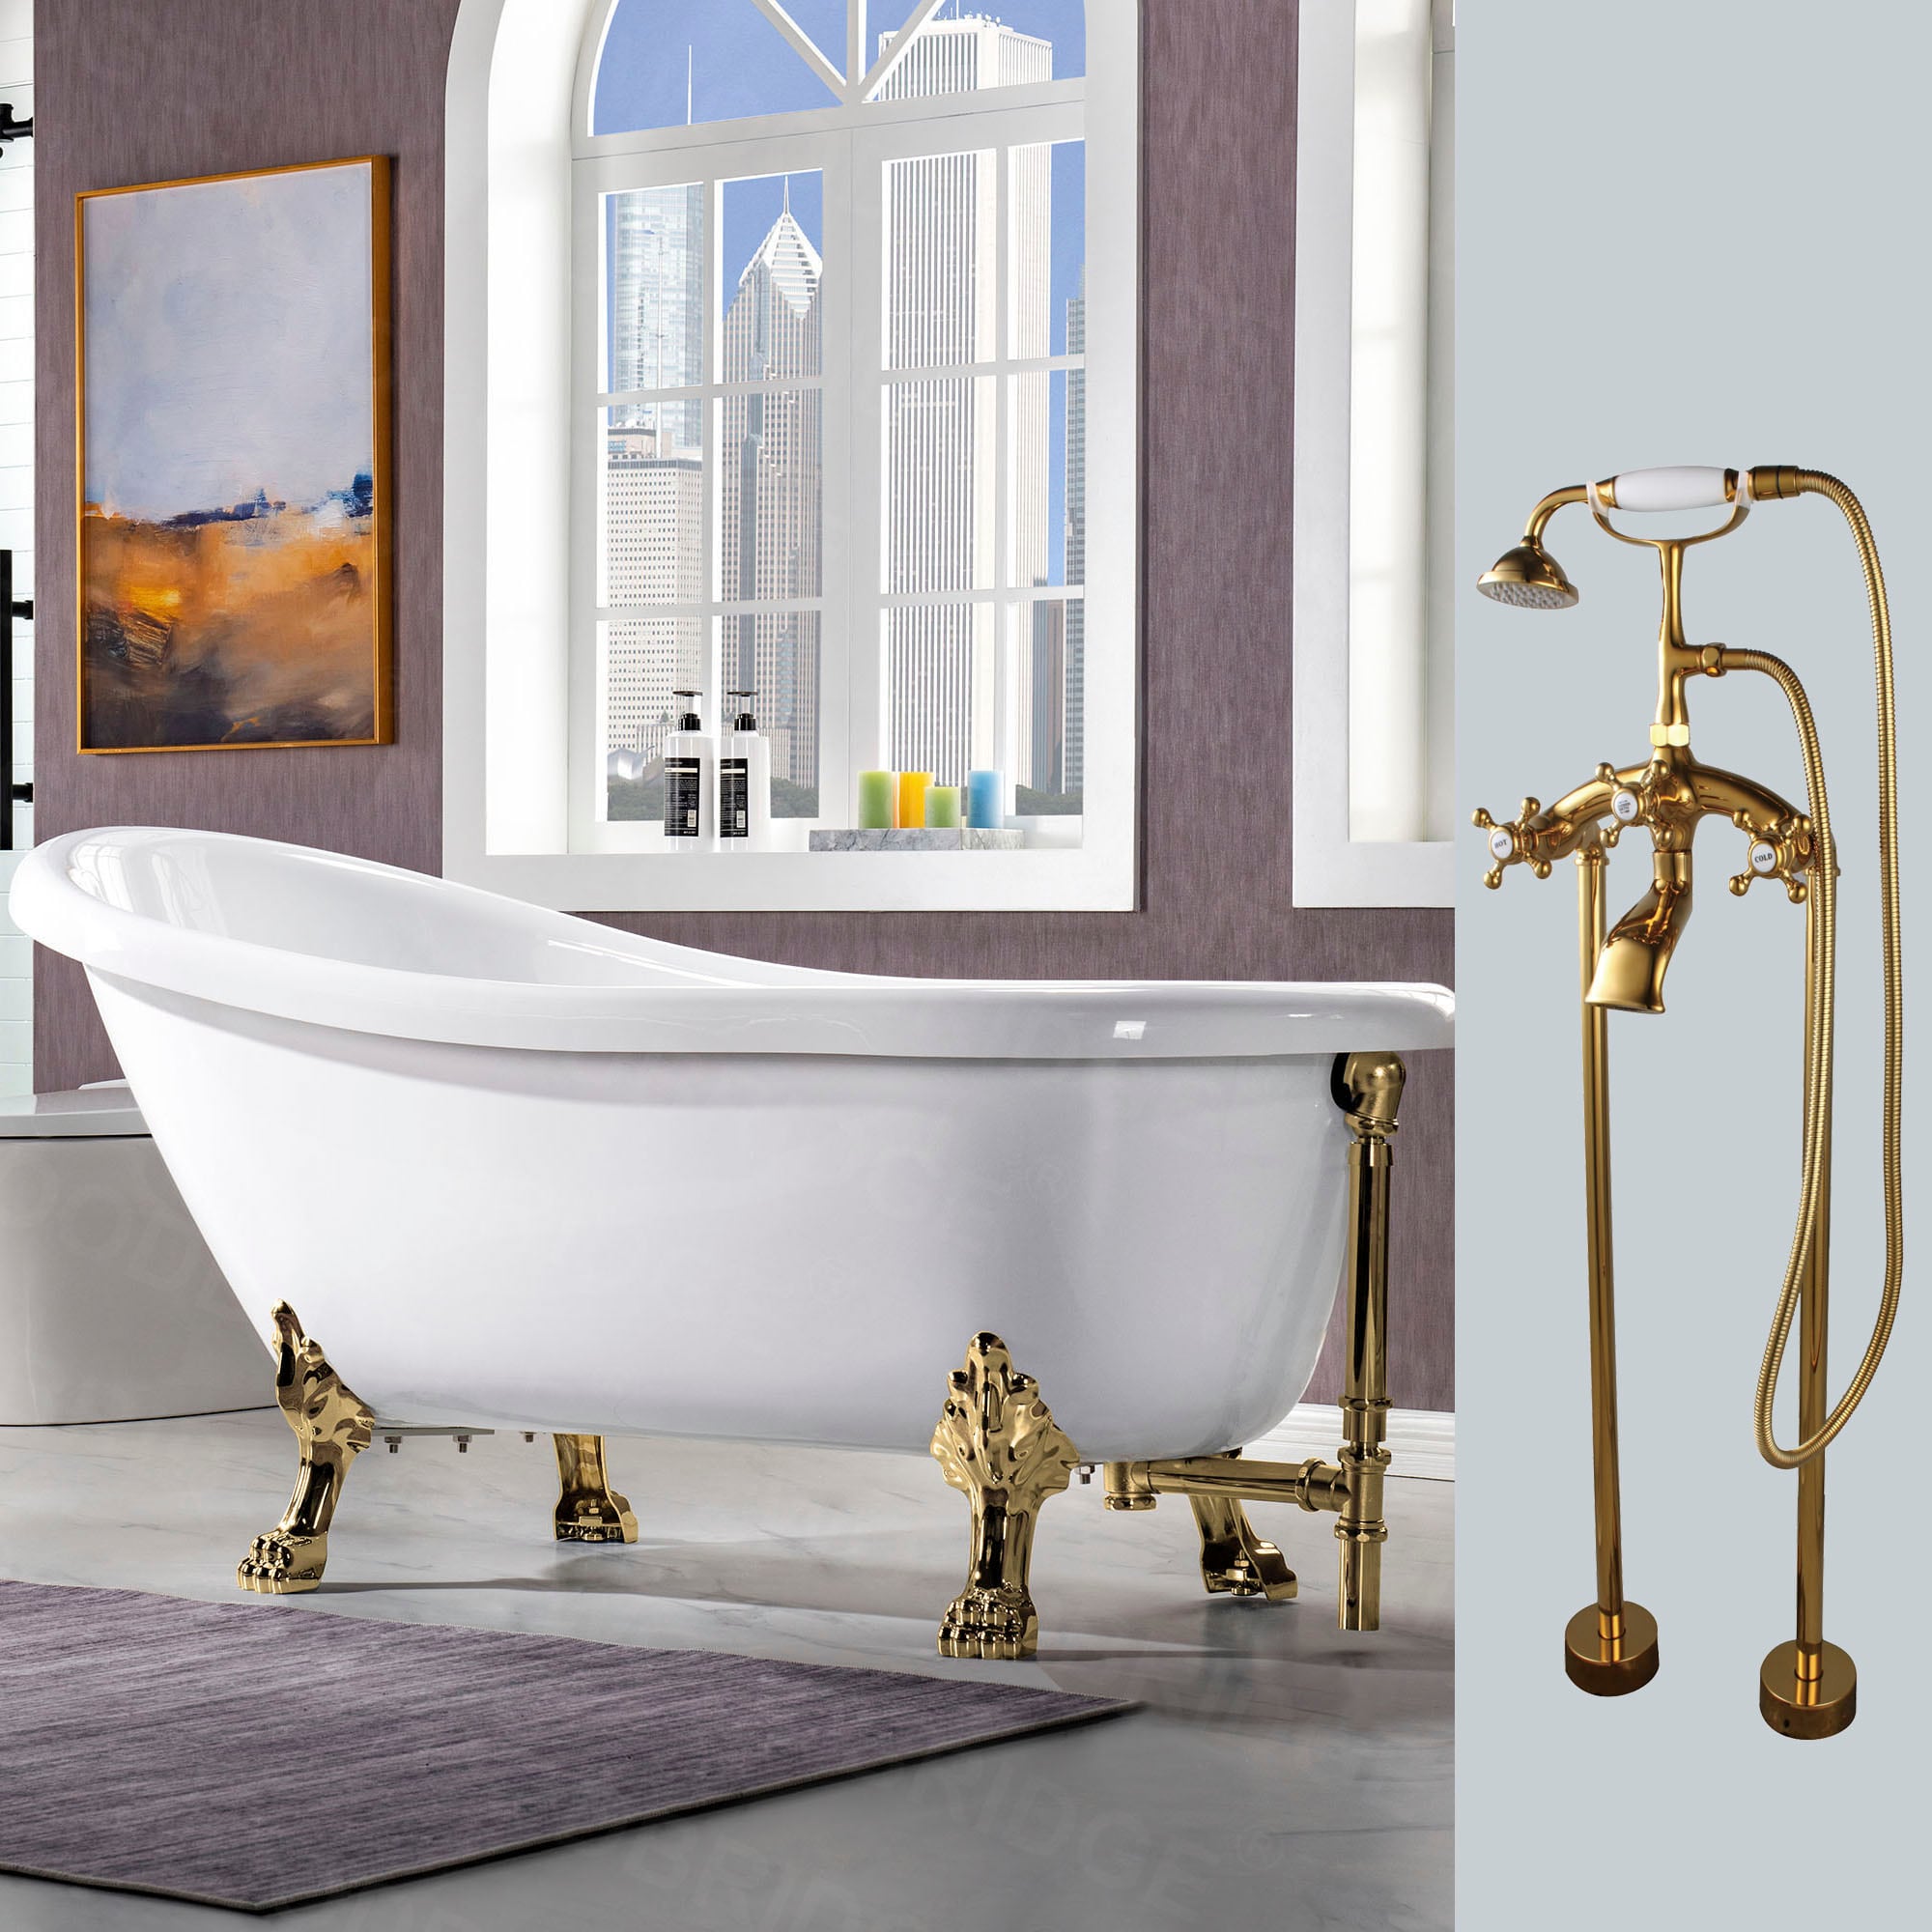 Albi 29.875-in x 67-in White with Gold Trim Acrylic Oval Clawfoot Soaking Bathtub with Faucet and Drain (Reversible Drain) | - Woodbridge LB196